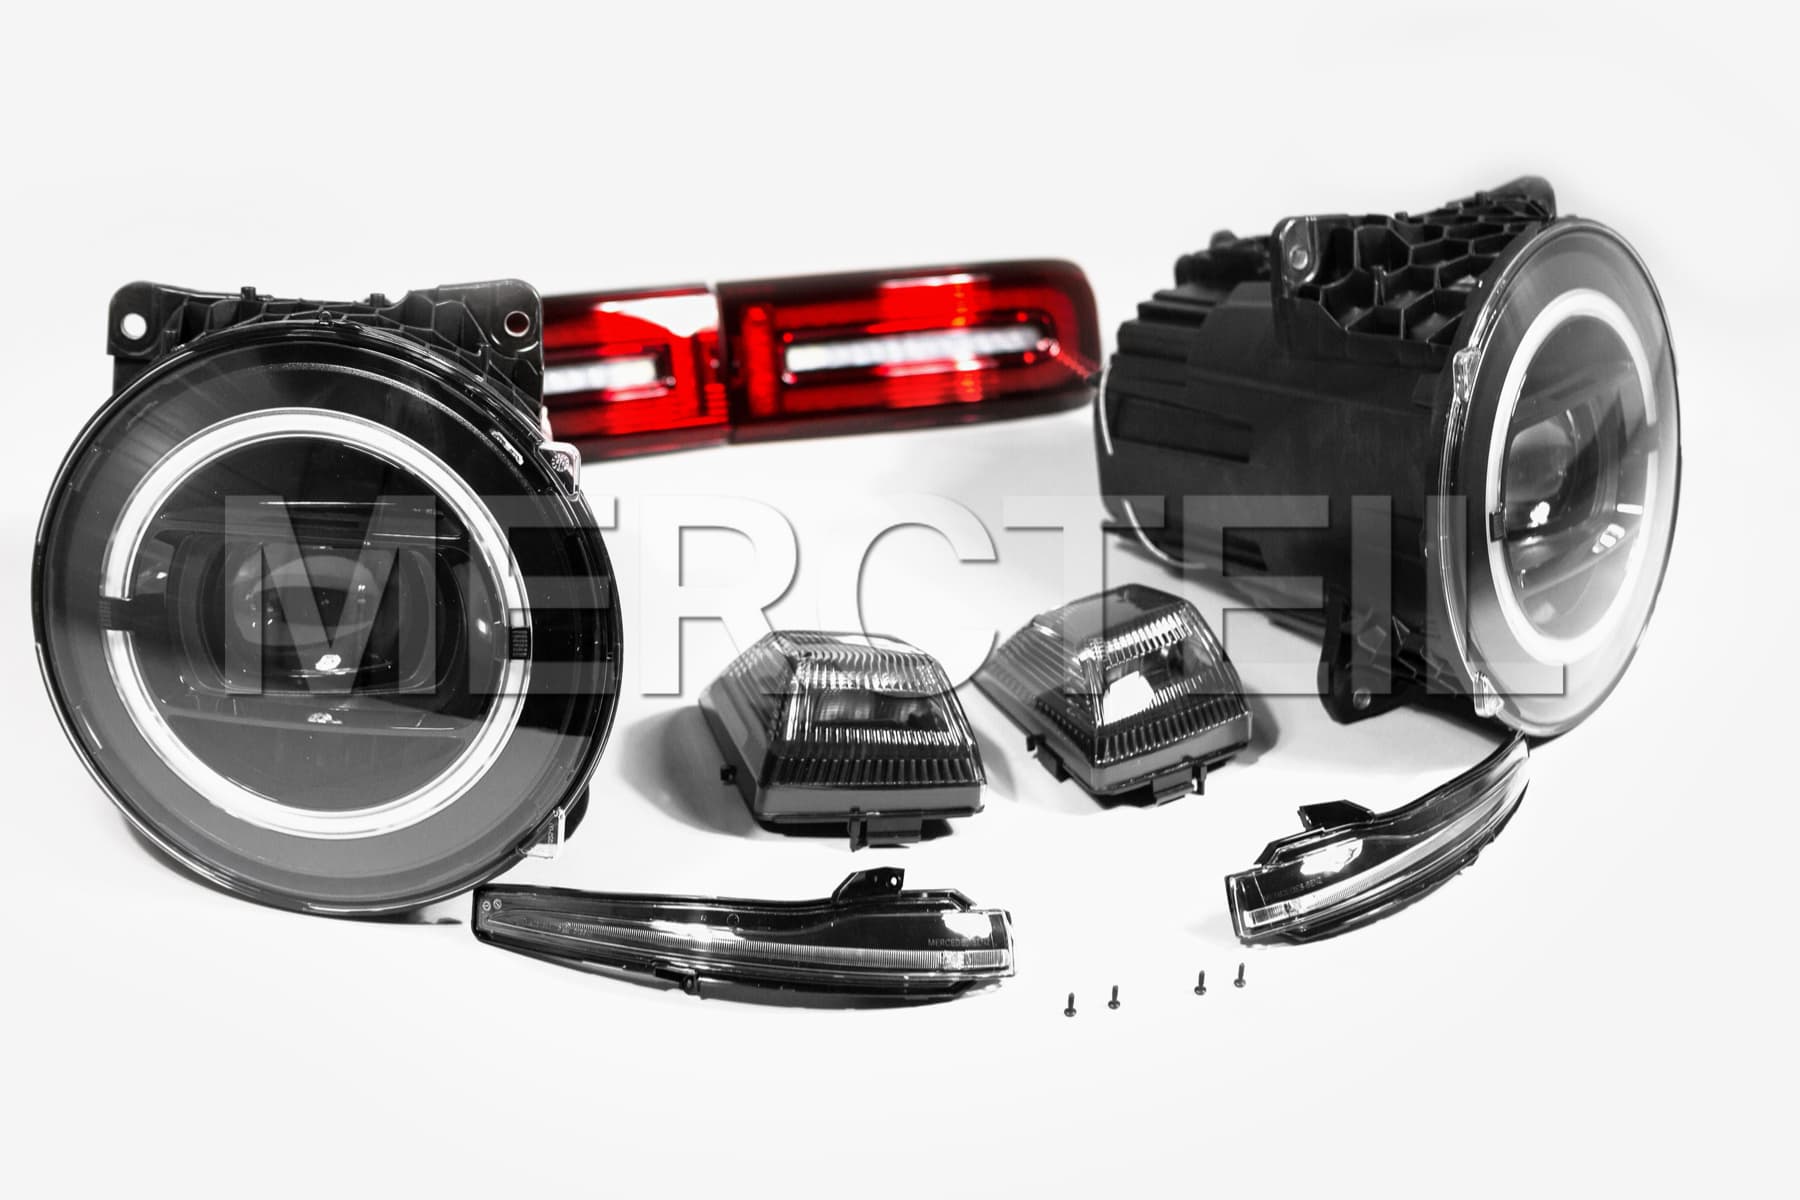 G Wagon Night Package Design Lights System Genuine Mercedes-Benz W463A (part number: 	
A4639067101)